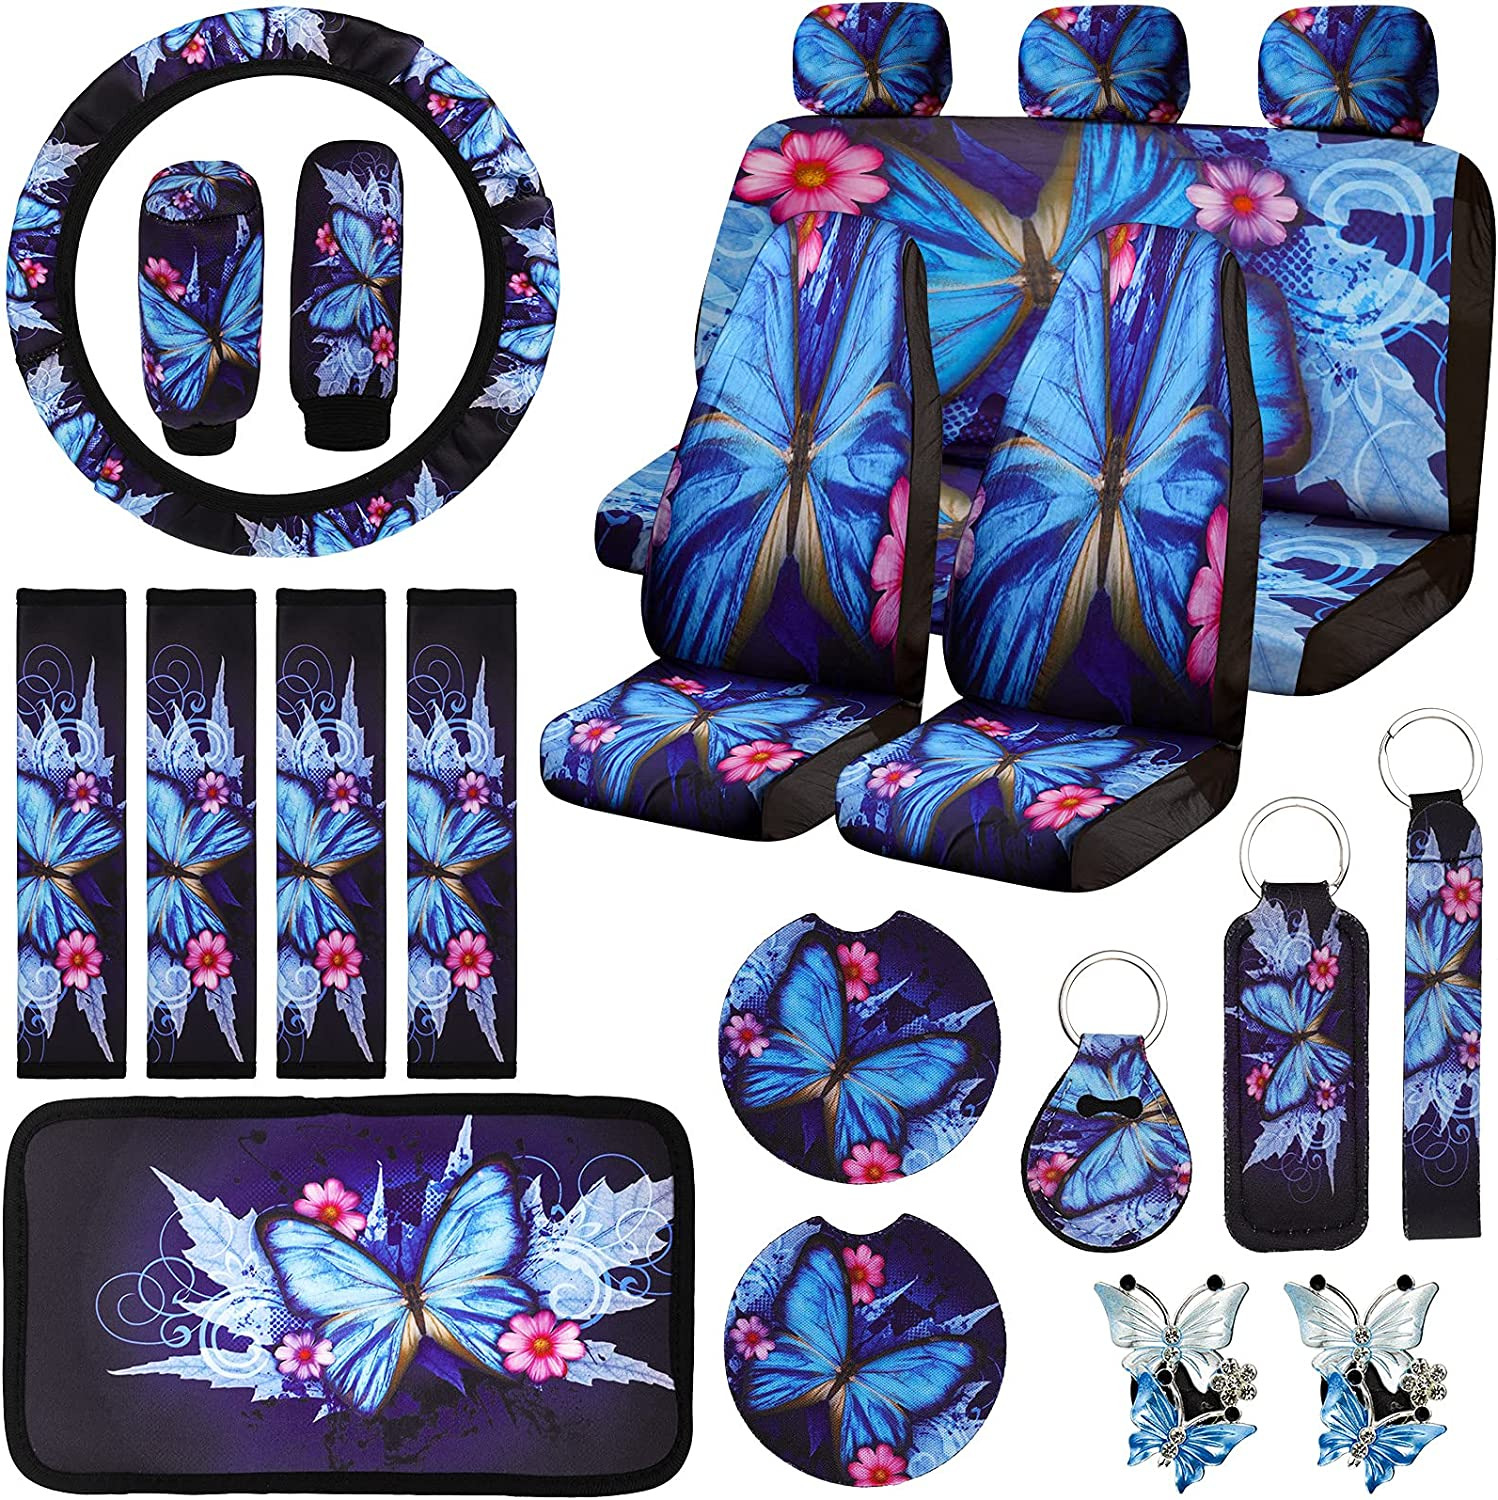 Frienda 22 Pieces Butterfly Car Seat Covers,Butterfly Car Accessories Set Steeri